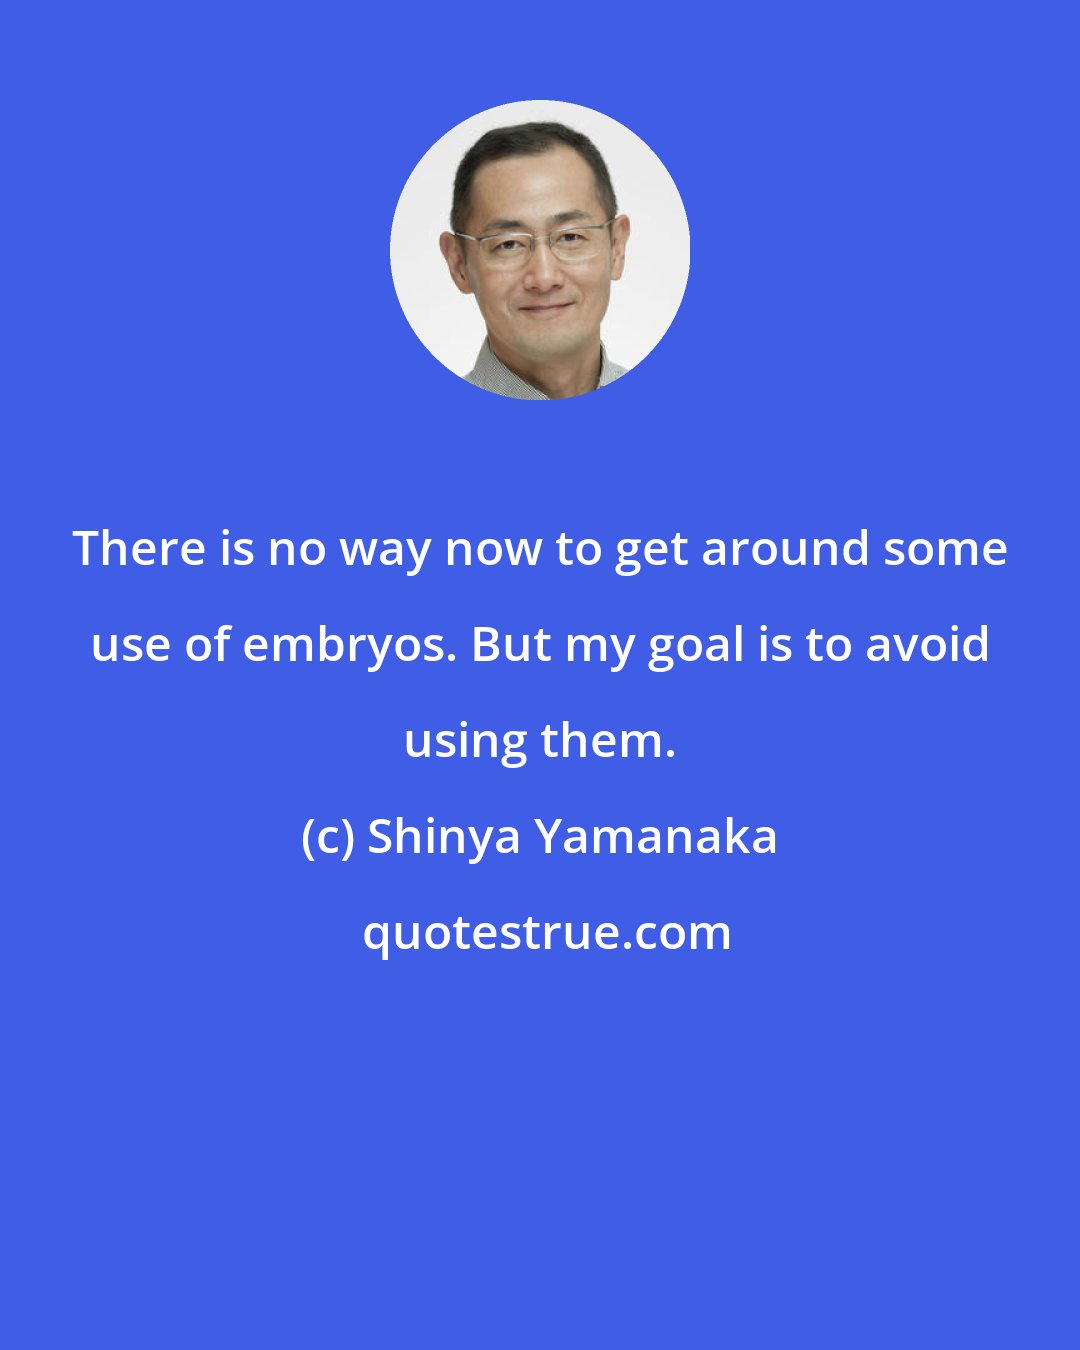 Shinya Yamanaka: There is no way now to get around some use of embryos. But my goal is to avoid using them.